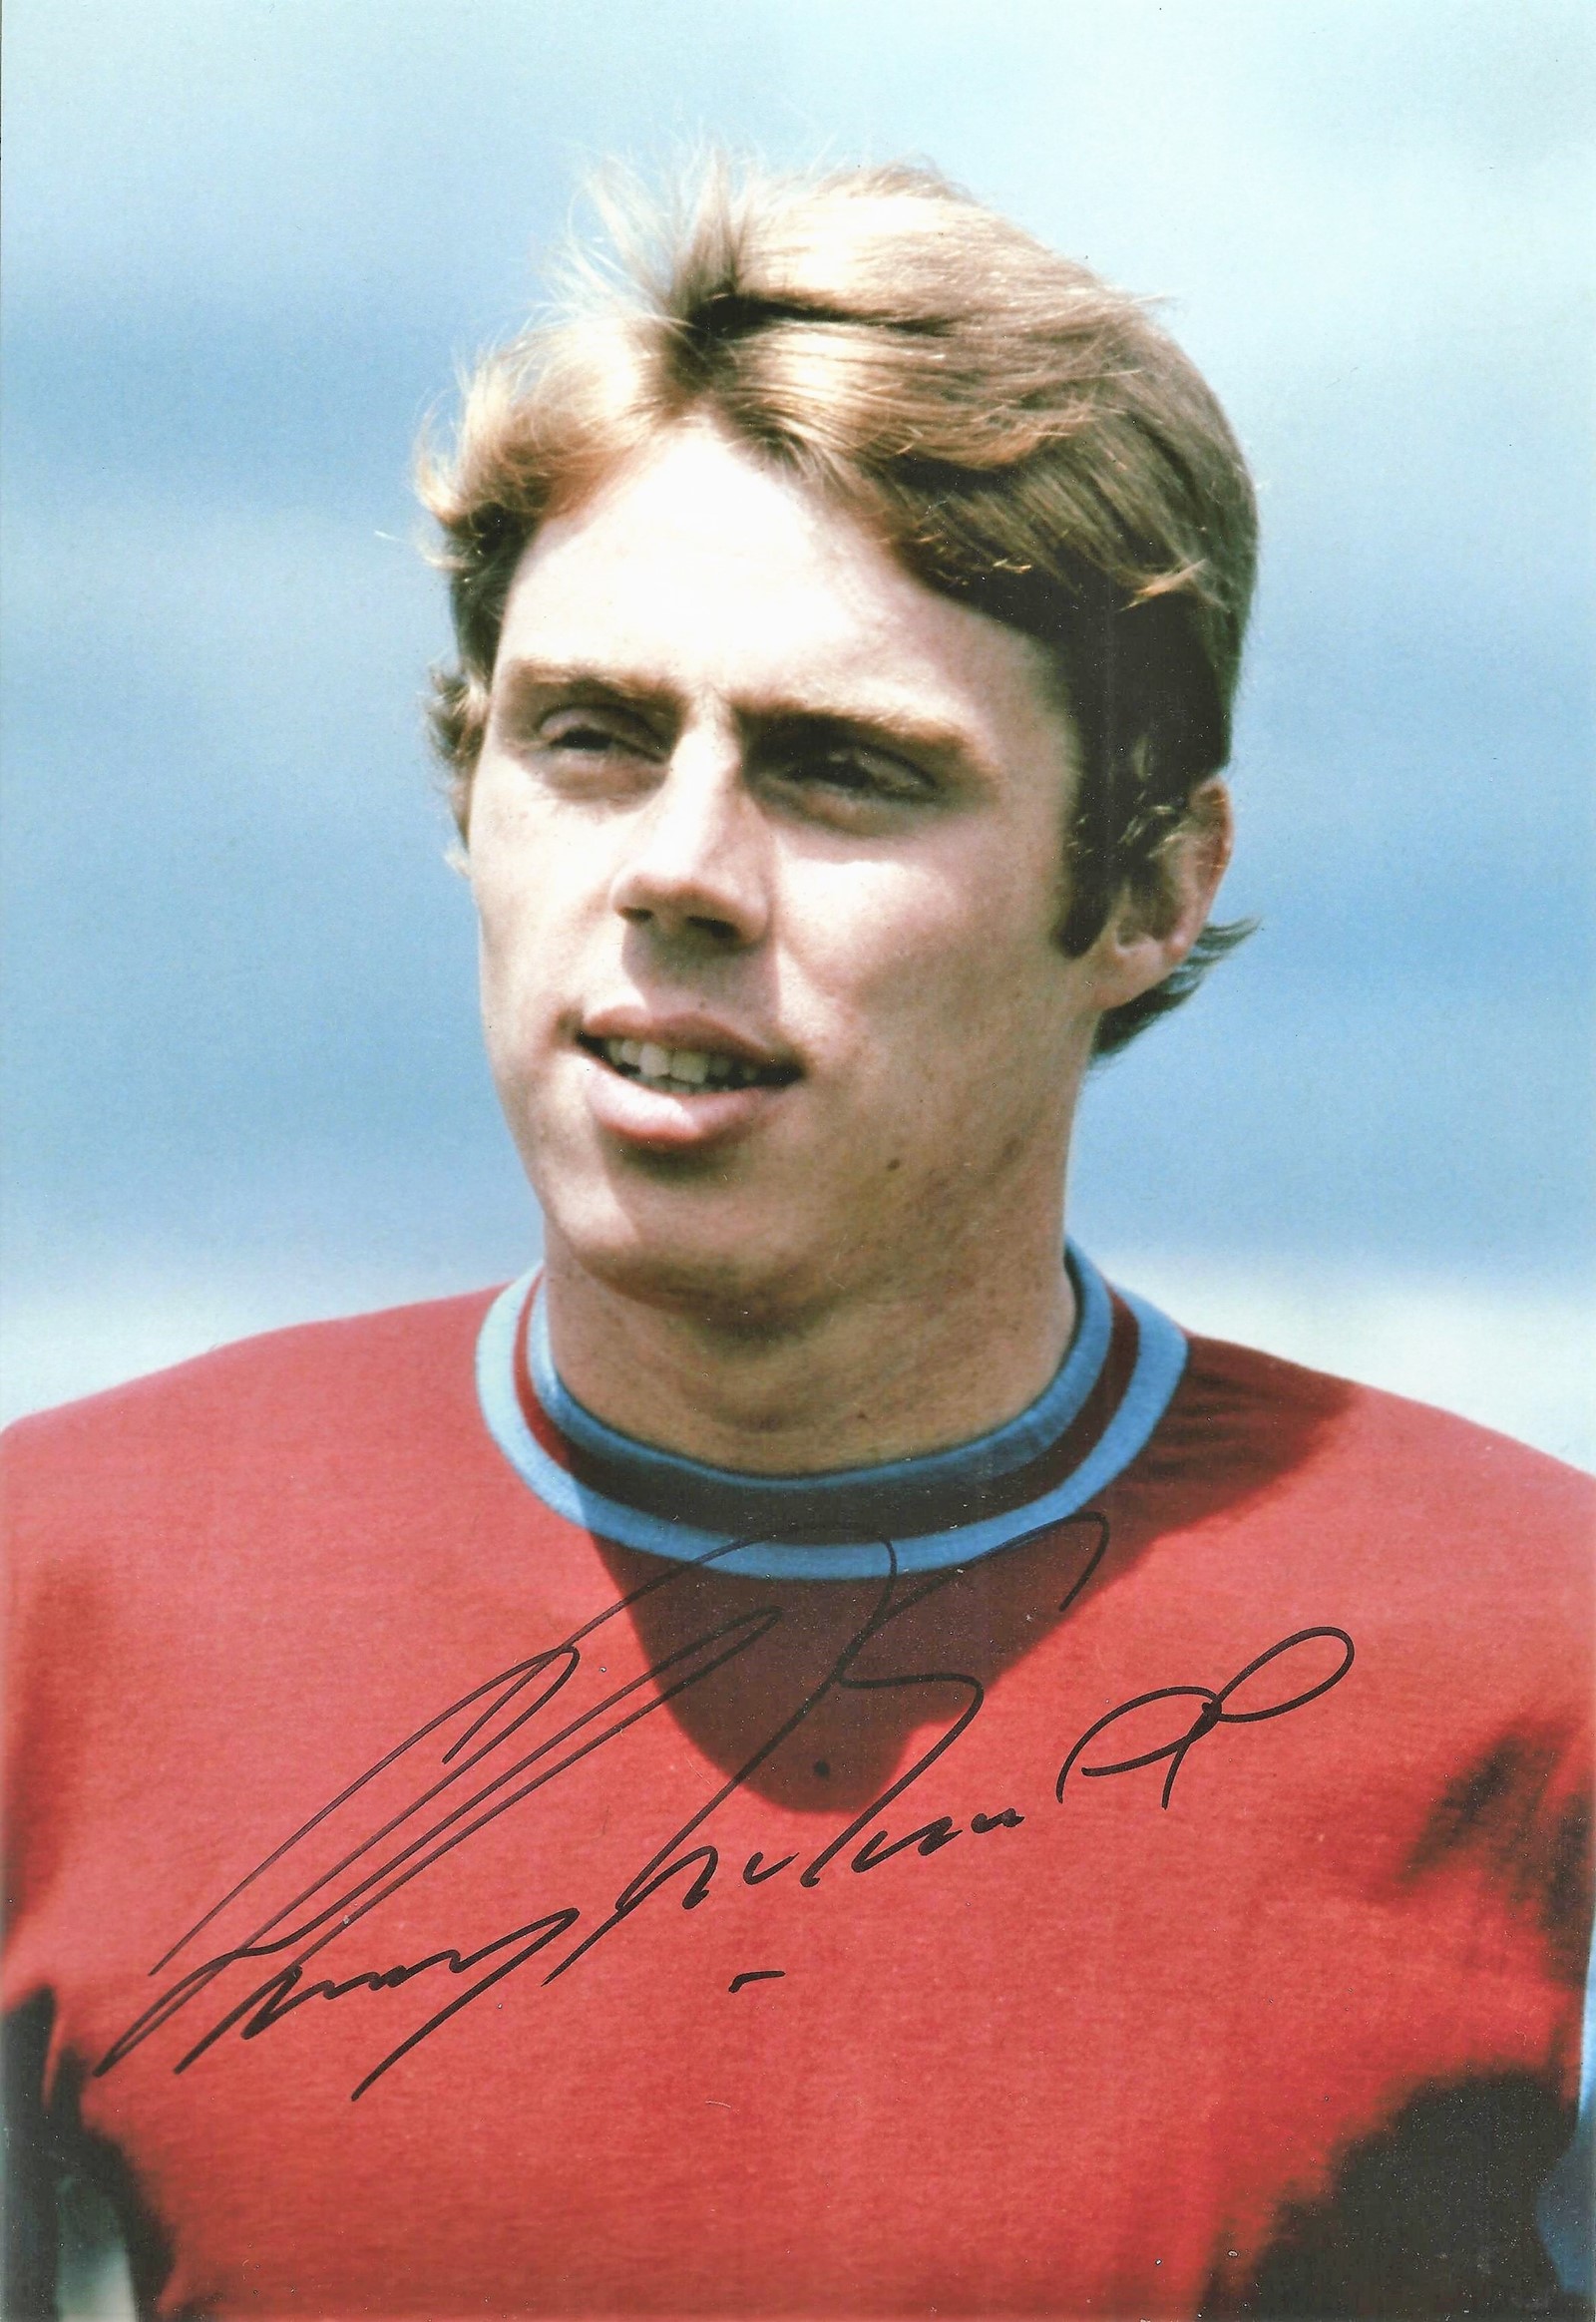 Football Harry Redknapp signed West Ham United 12x8 colour photo. Henry James Redknapp (born 2 March